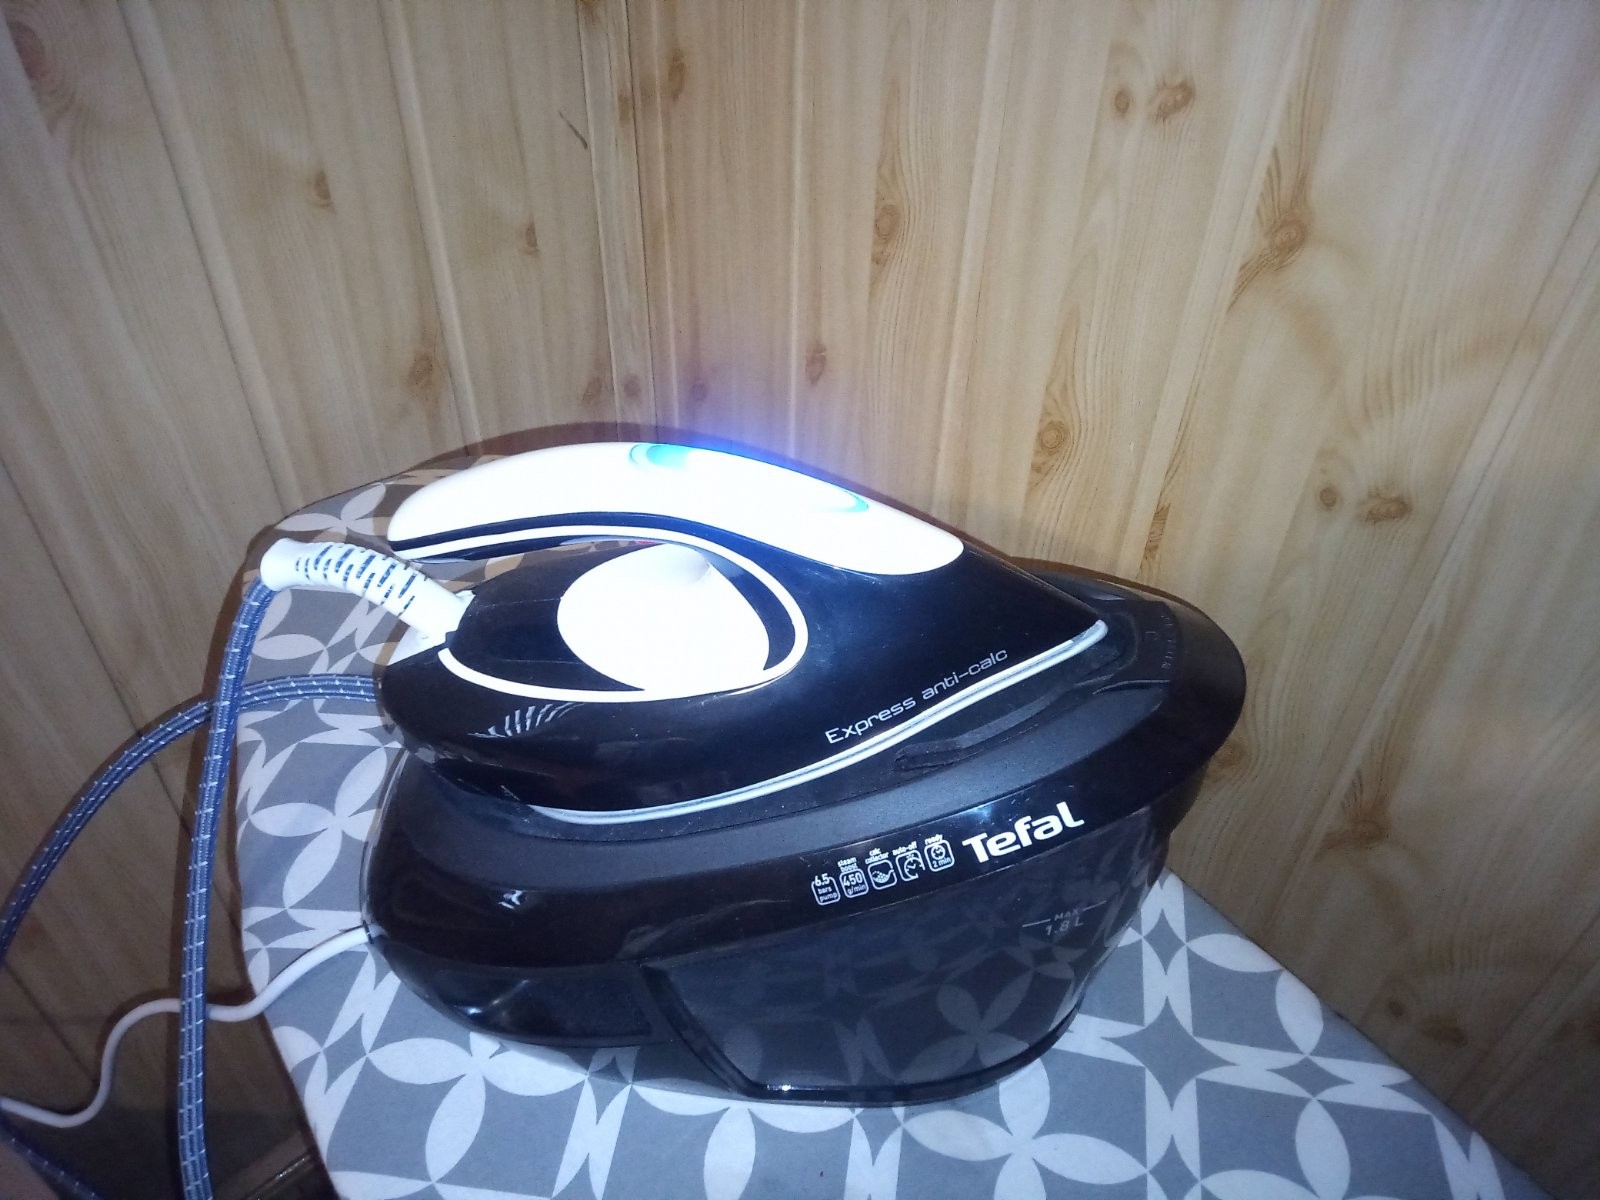 8055 Dnepropetrovsk, specifications Lviv, buy stores Ukraine: reviews, - Kyiv, prices, steam generator: iron Express with Odessa SV (SV8055E0) price in > Tefal